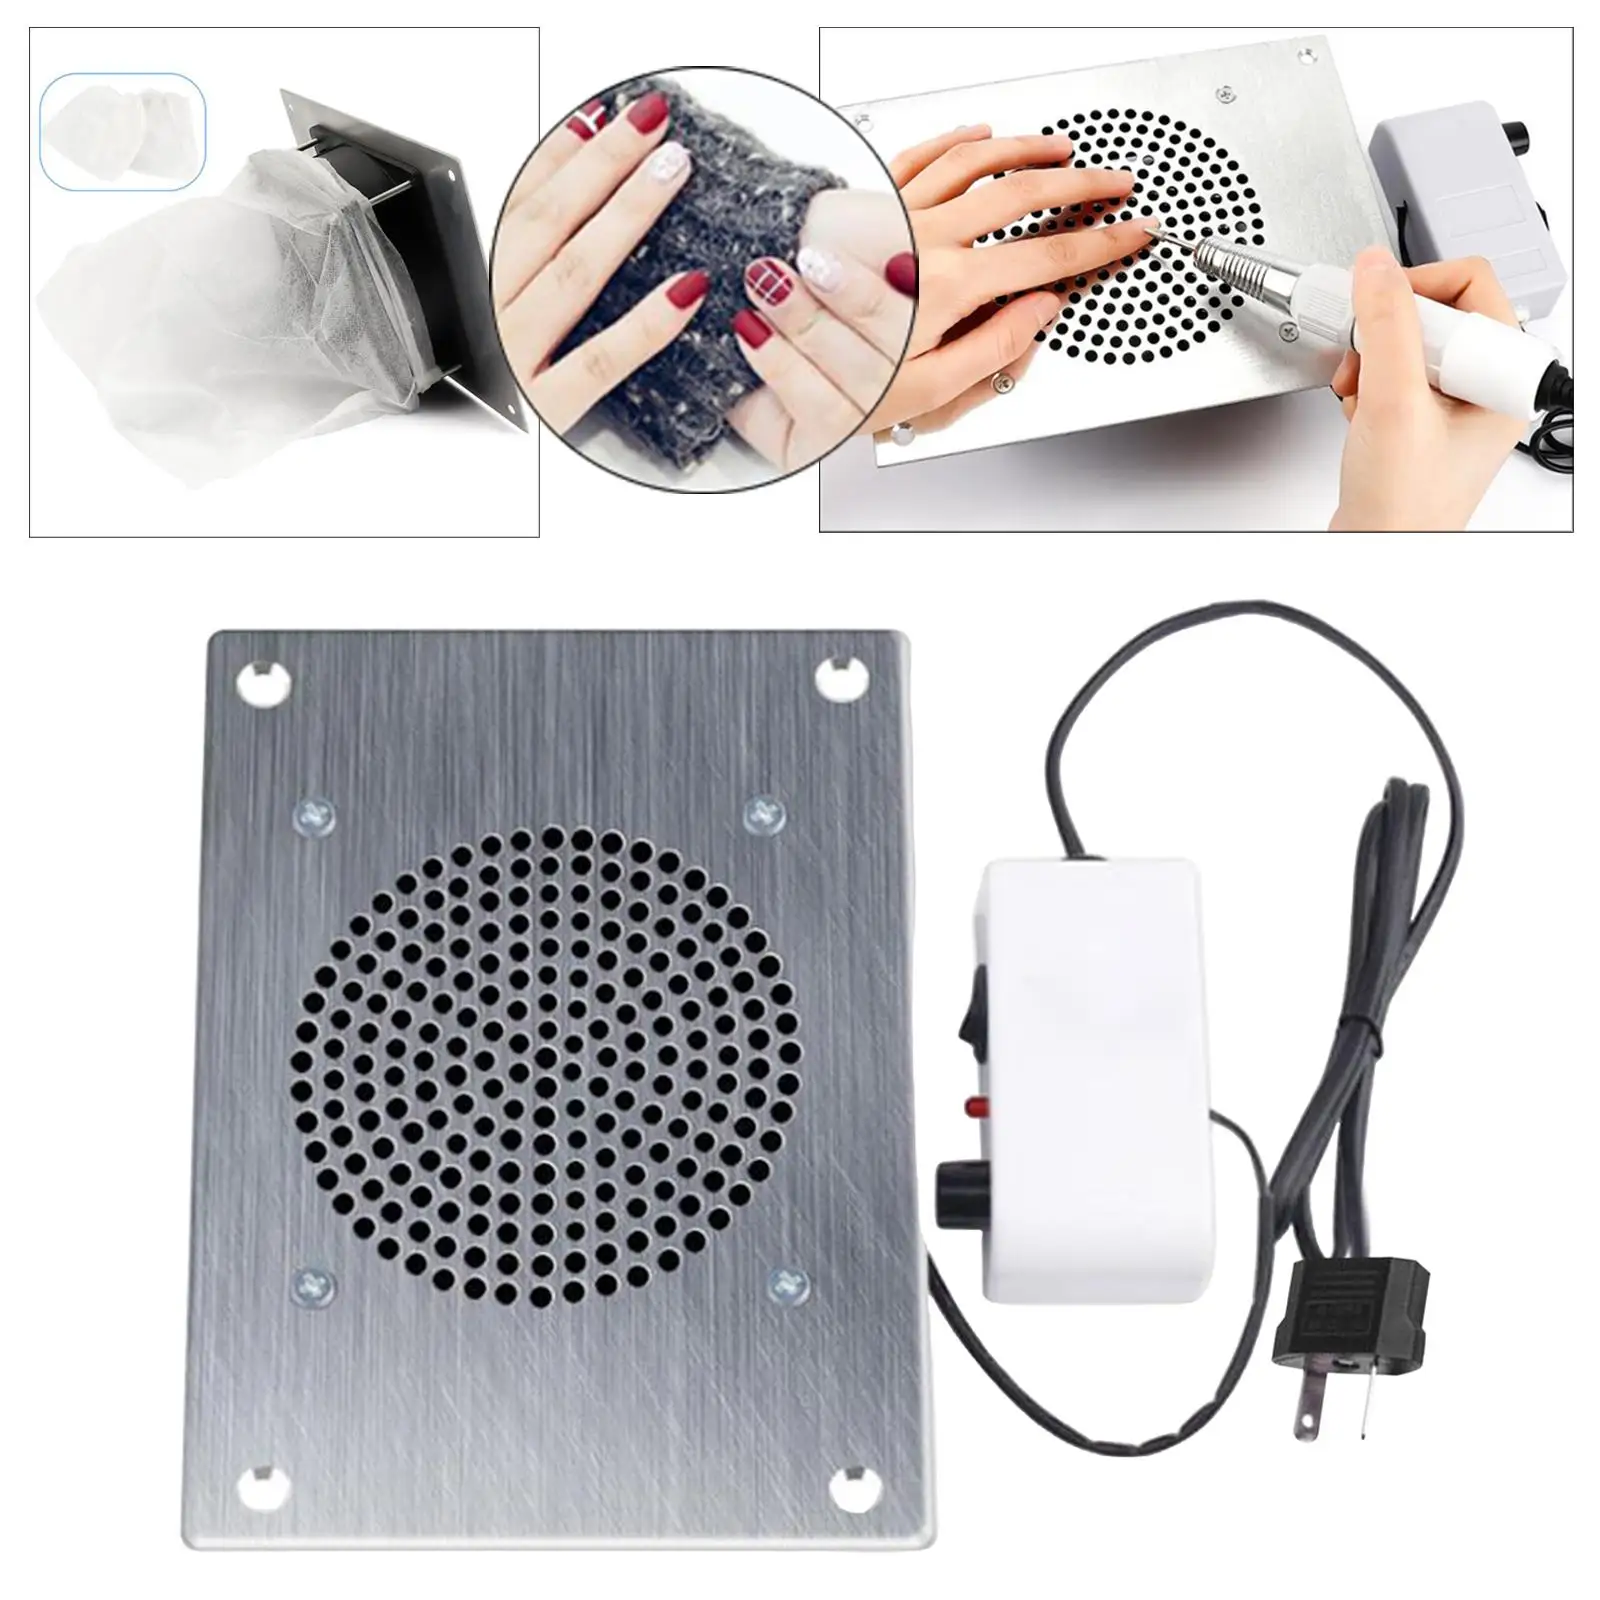 Nail Dust Collector Manicure Tools Electric Dust Suction Machine for Nail Polishing Acrylic Gel 110V US Professional Low Noise